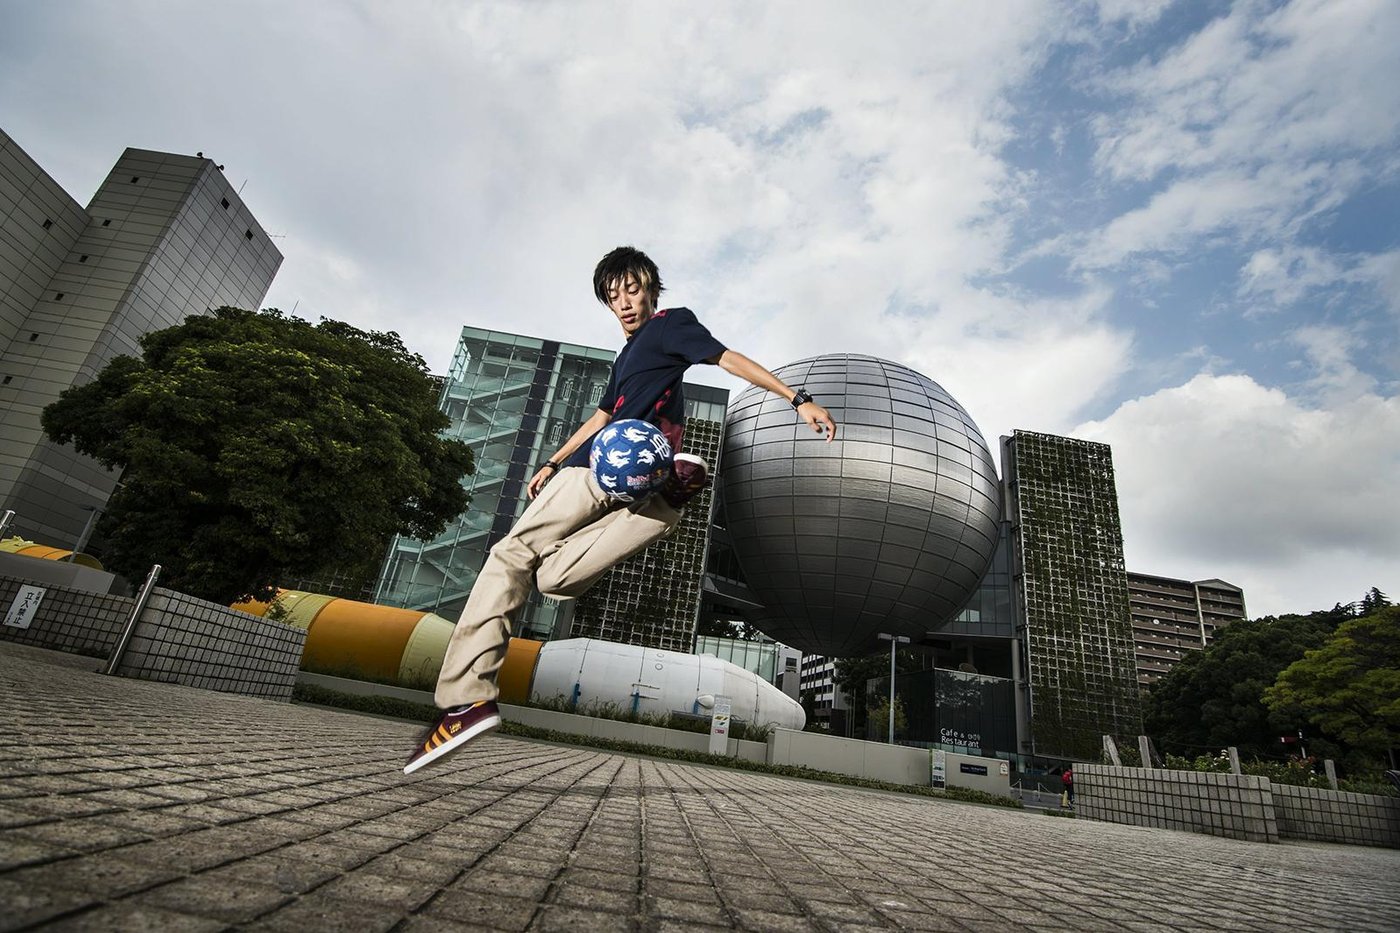 Kotaro Tokuda performs prior to the Red Bull Street Style Japan Final 2014 at the Sirakawa park in Nagoya, Japan on September 5th, 2014 // Naoyuki Shibata/Red Bull Content Pool // P-20141002-00139 // Usage for editorial use only // Please go to www.redbullcontentpool.com for further information. //